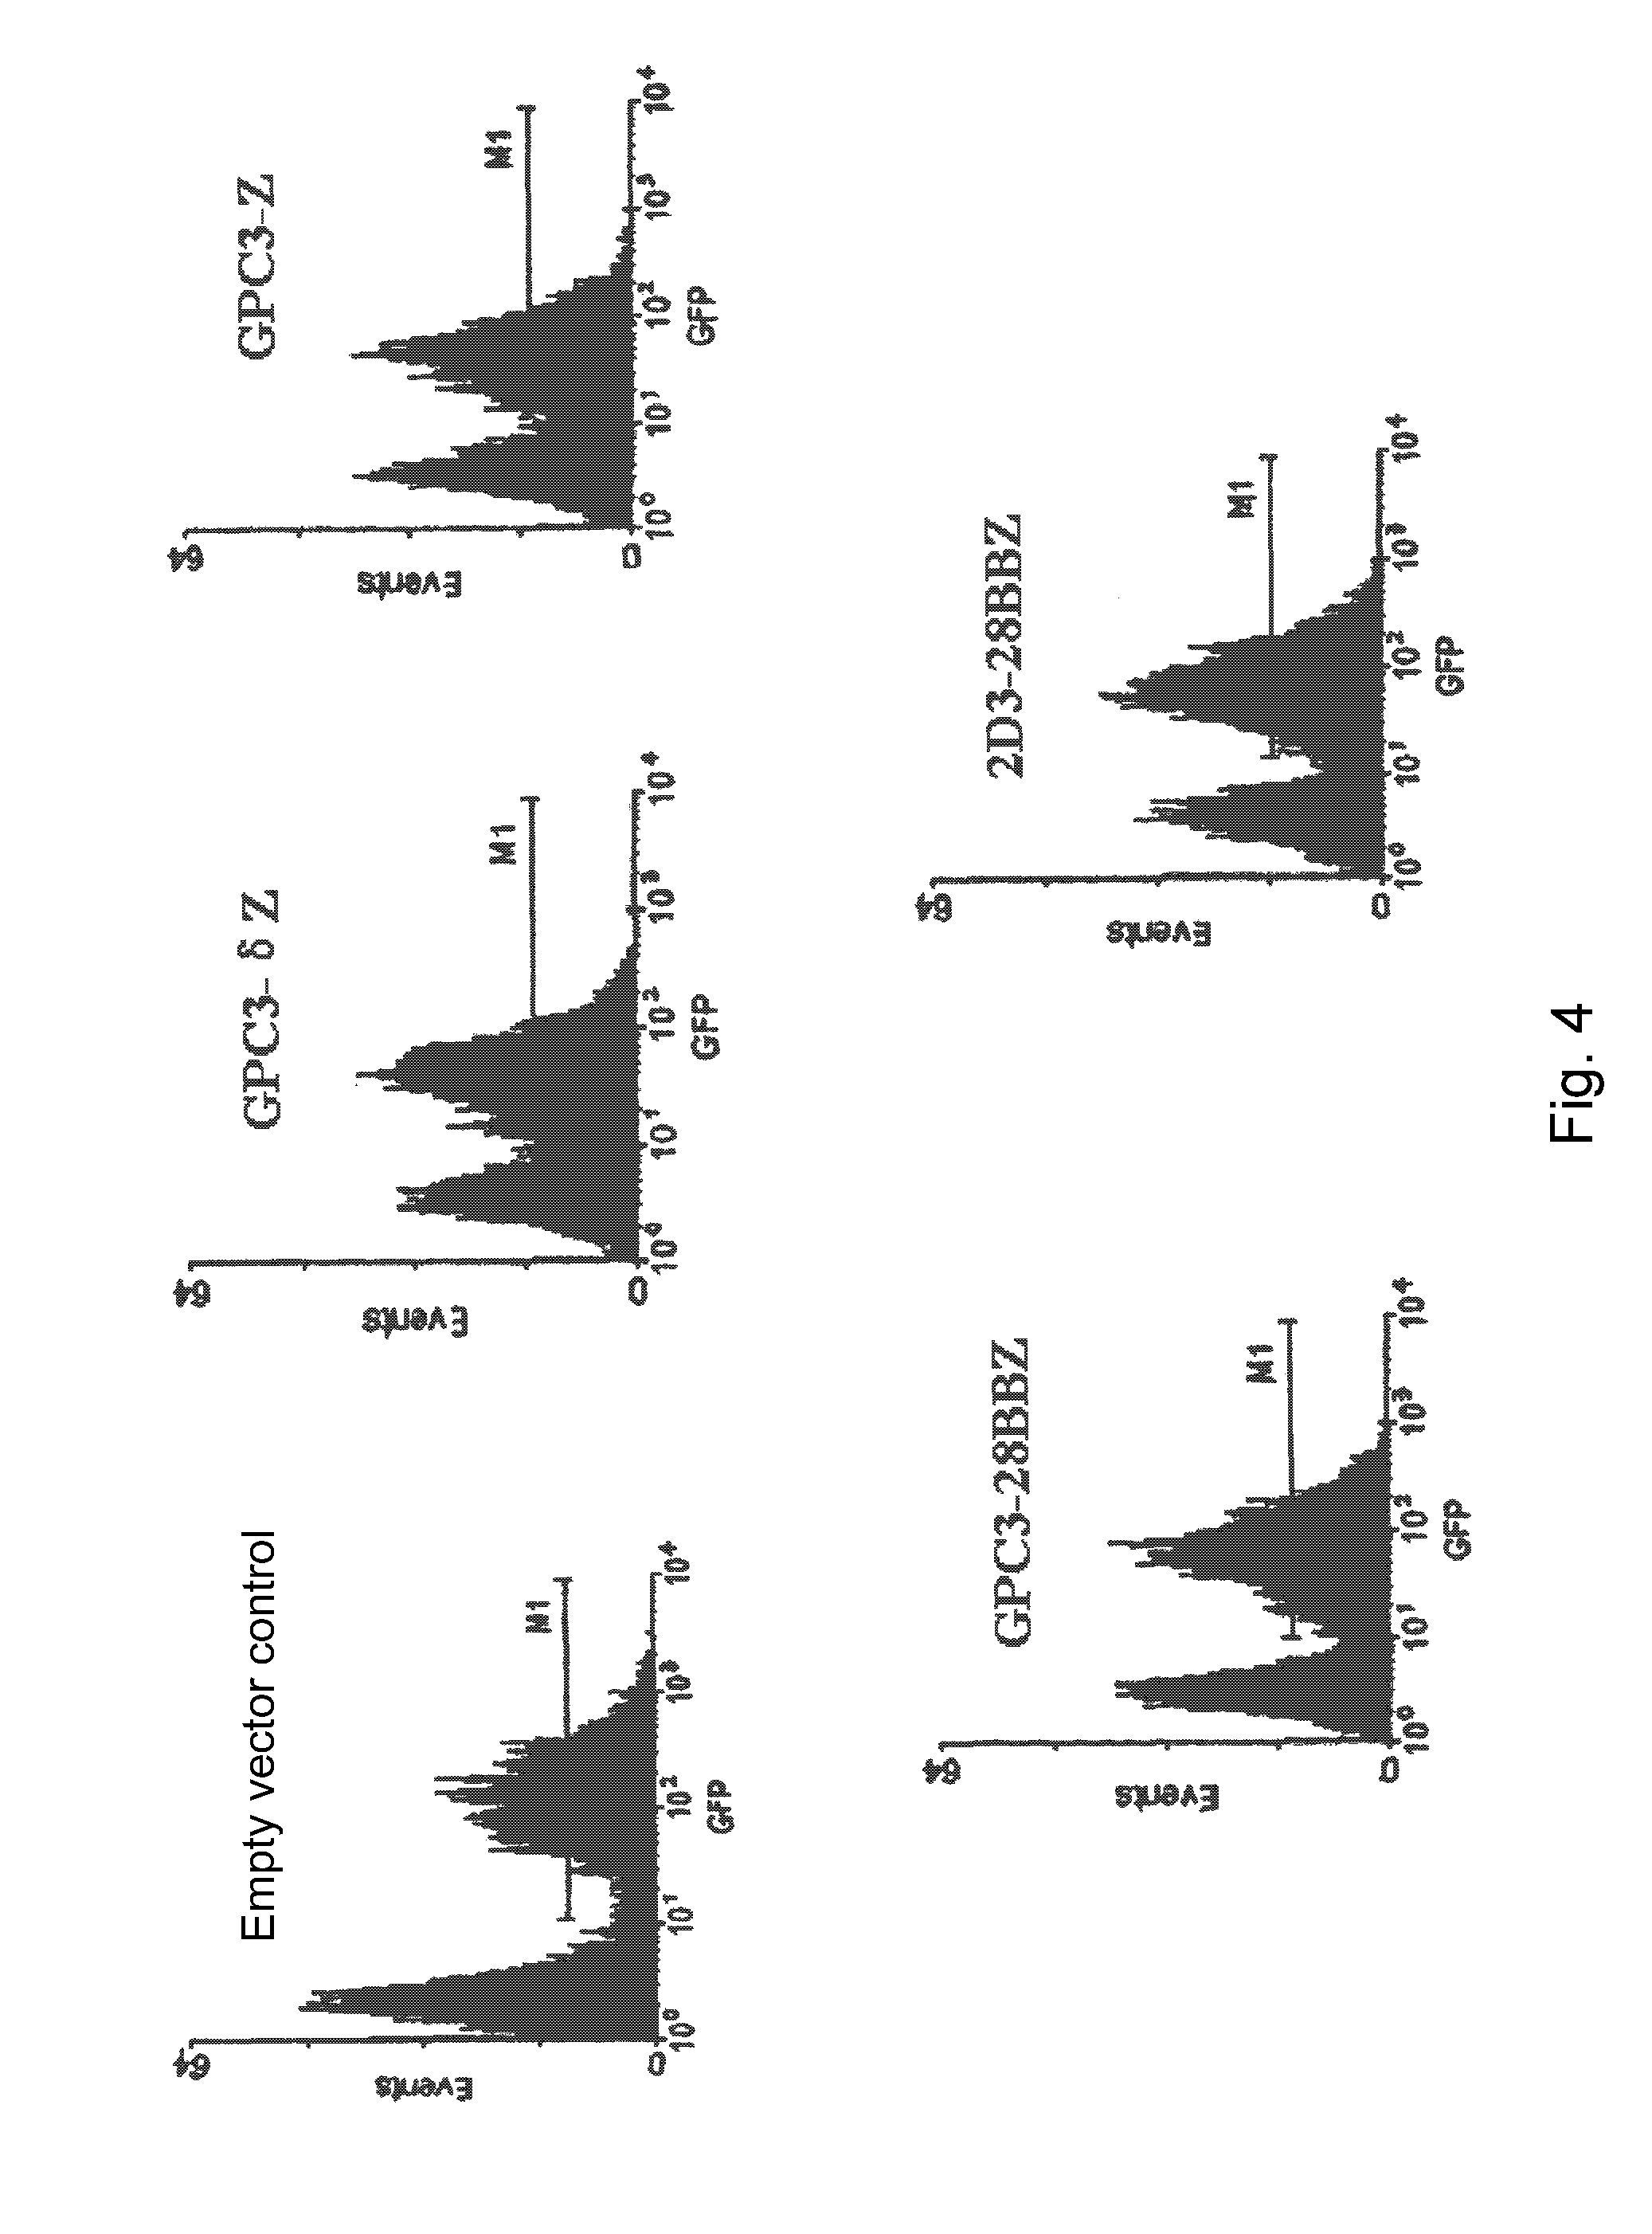 Nucleic Acid Of Coded GPC3 Chimeric Antigen Receptor Protein And T Lymphocyte Expressing GPC3 Chimeric Antigen Receptor Protein